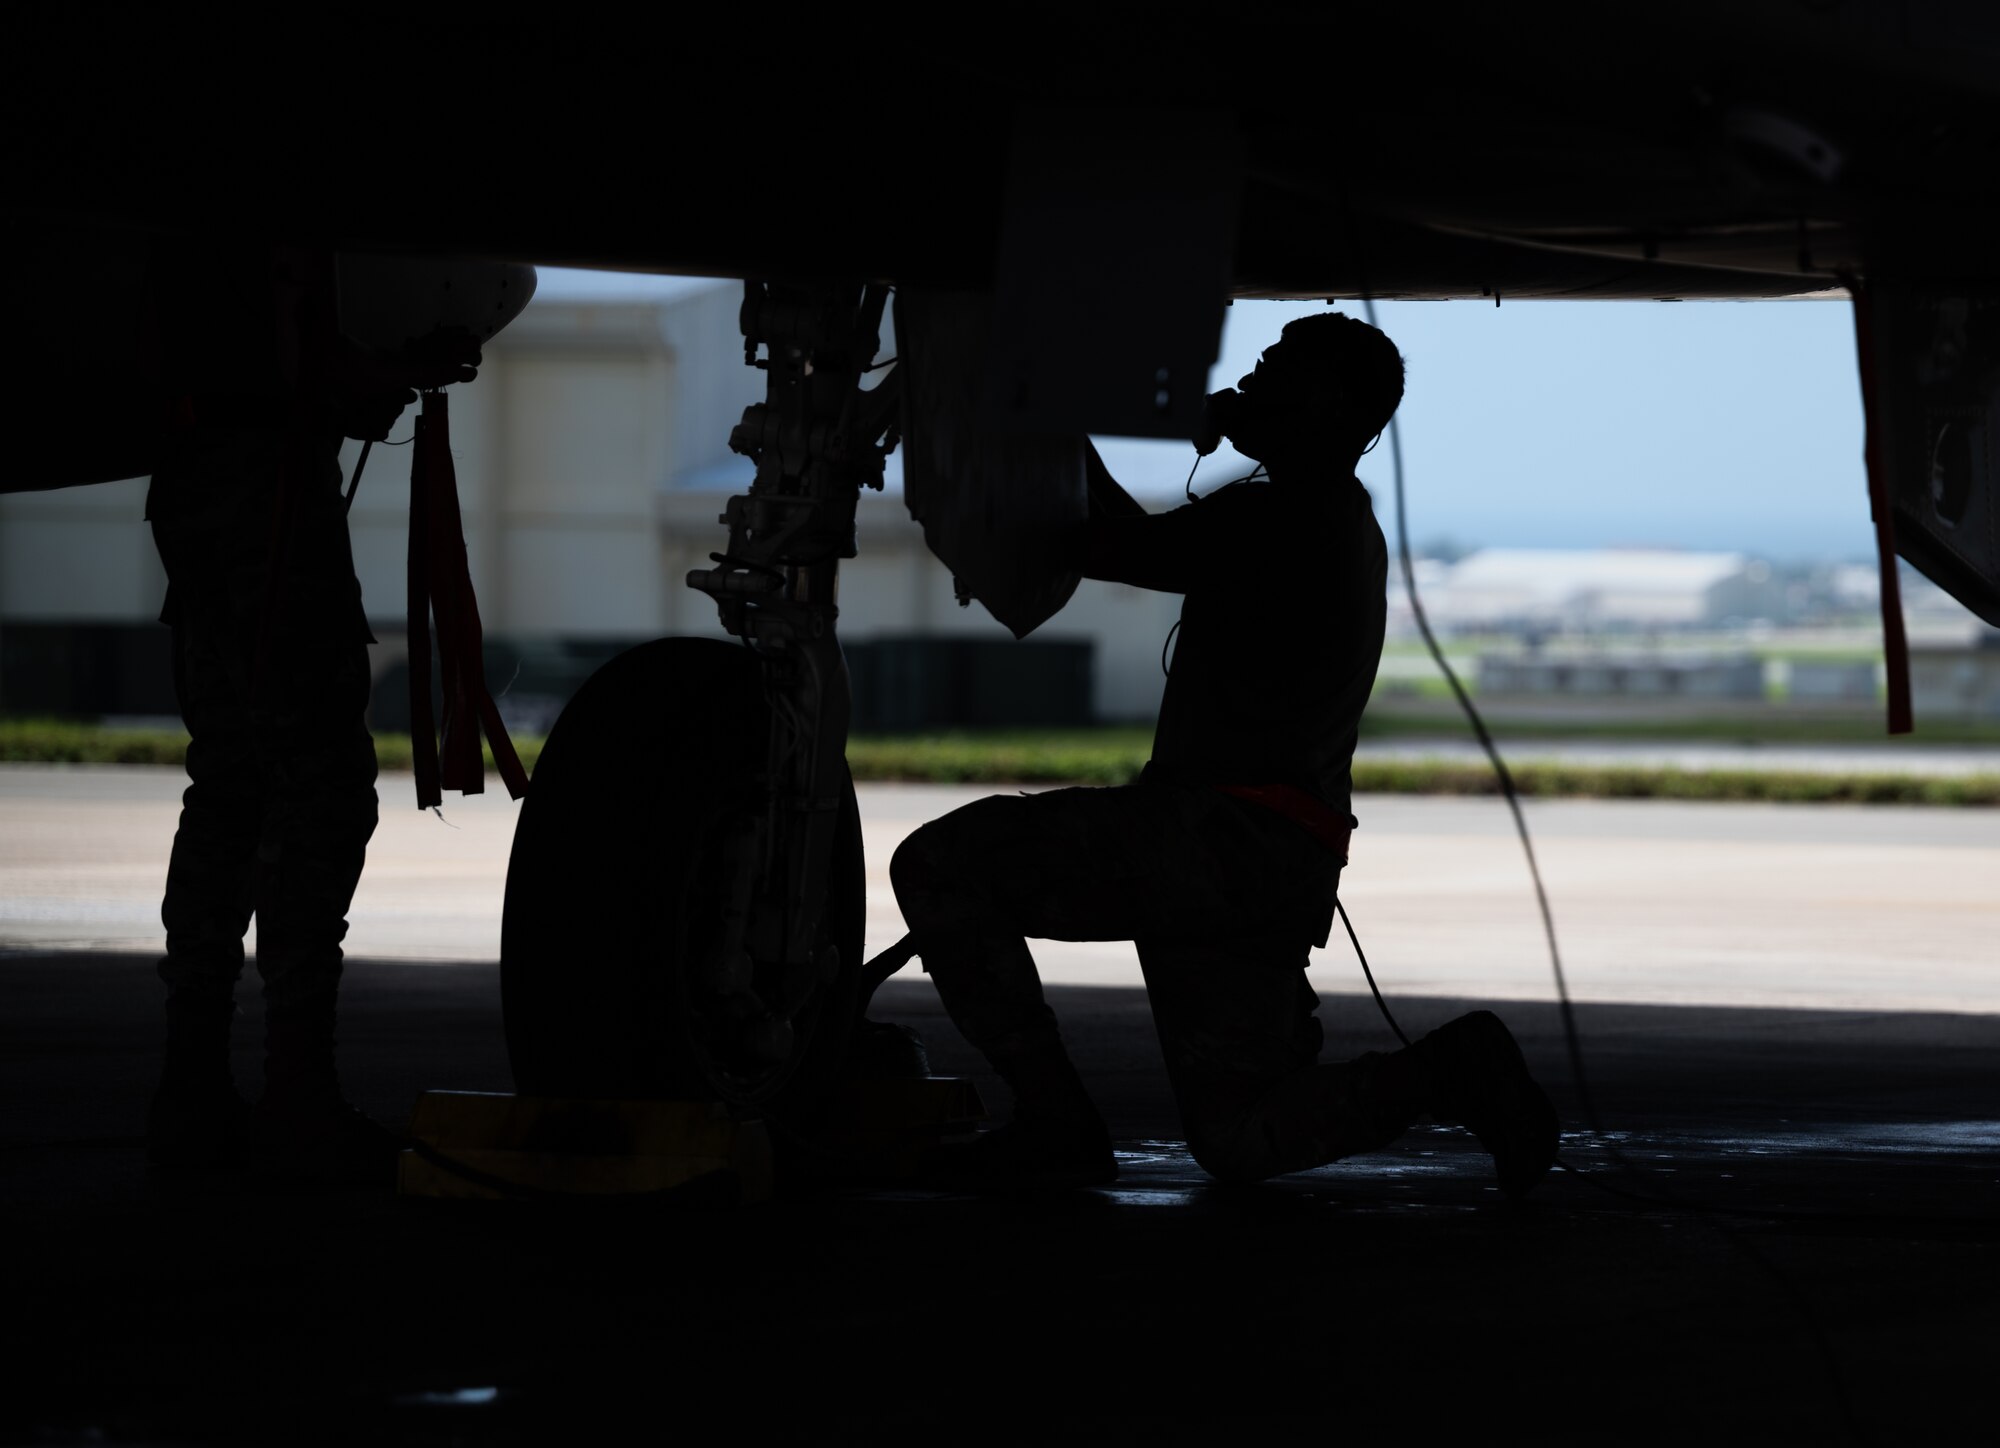 U.S. Air Force Airman 1st Class Joel Hernandez, 67th Aircraft Maintenance Unit crew chief, conducts preflight checks on an F-15C Eagle at Kadena Air Base, Japan, Sept. 14, 2021. Crew chiefs are responsible for the maintenance of their assigned aircraft, ensuring it’s ready to complete missions. (U.S. Air Force photo by Airman 1st Class Stephen Pulter)